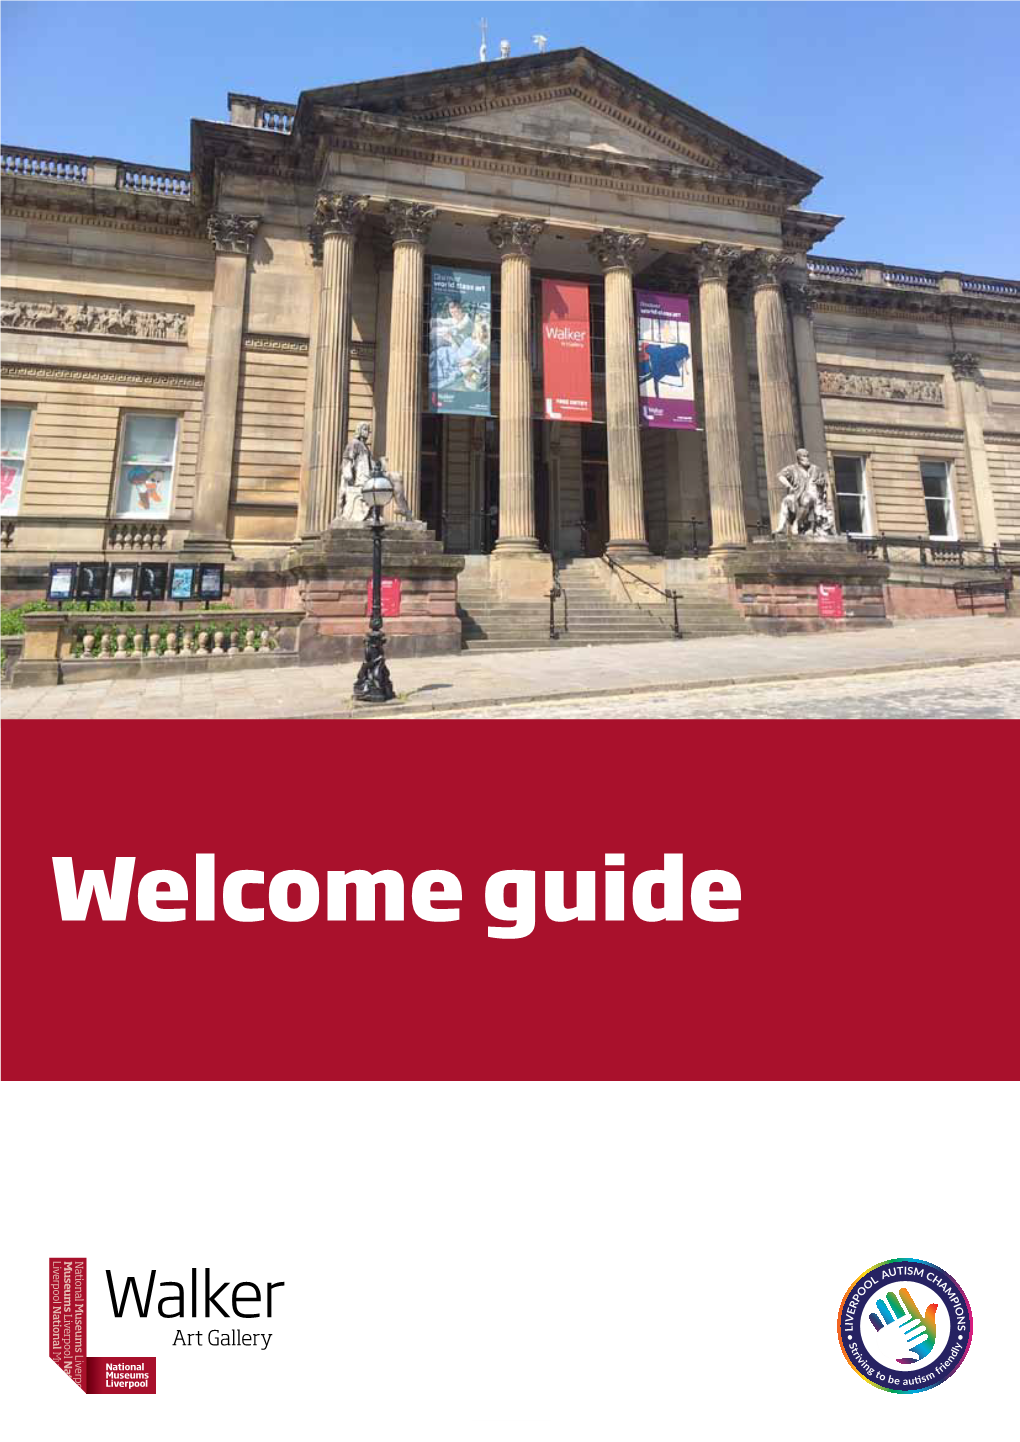 Welcome Guide to the Walker Art Gallery